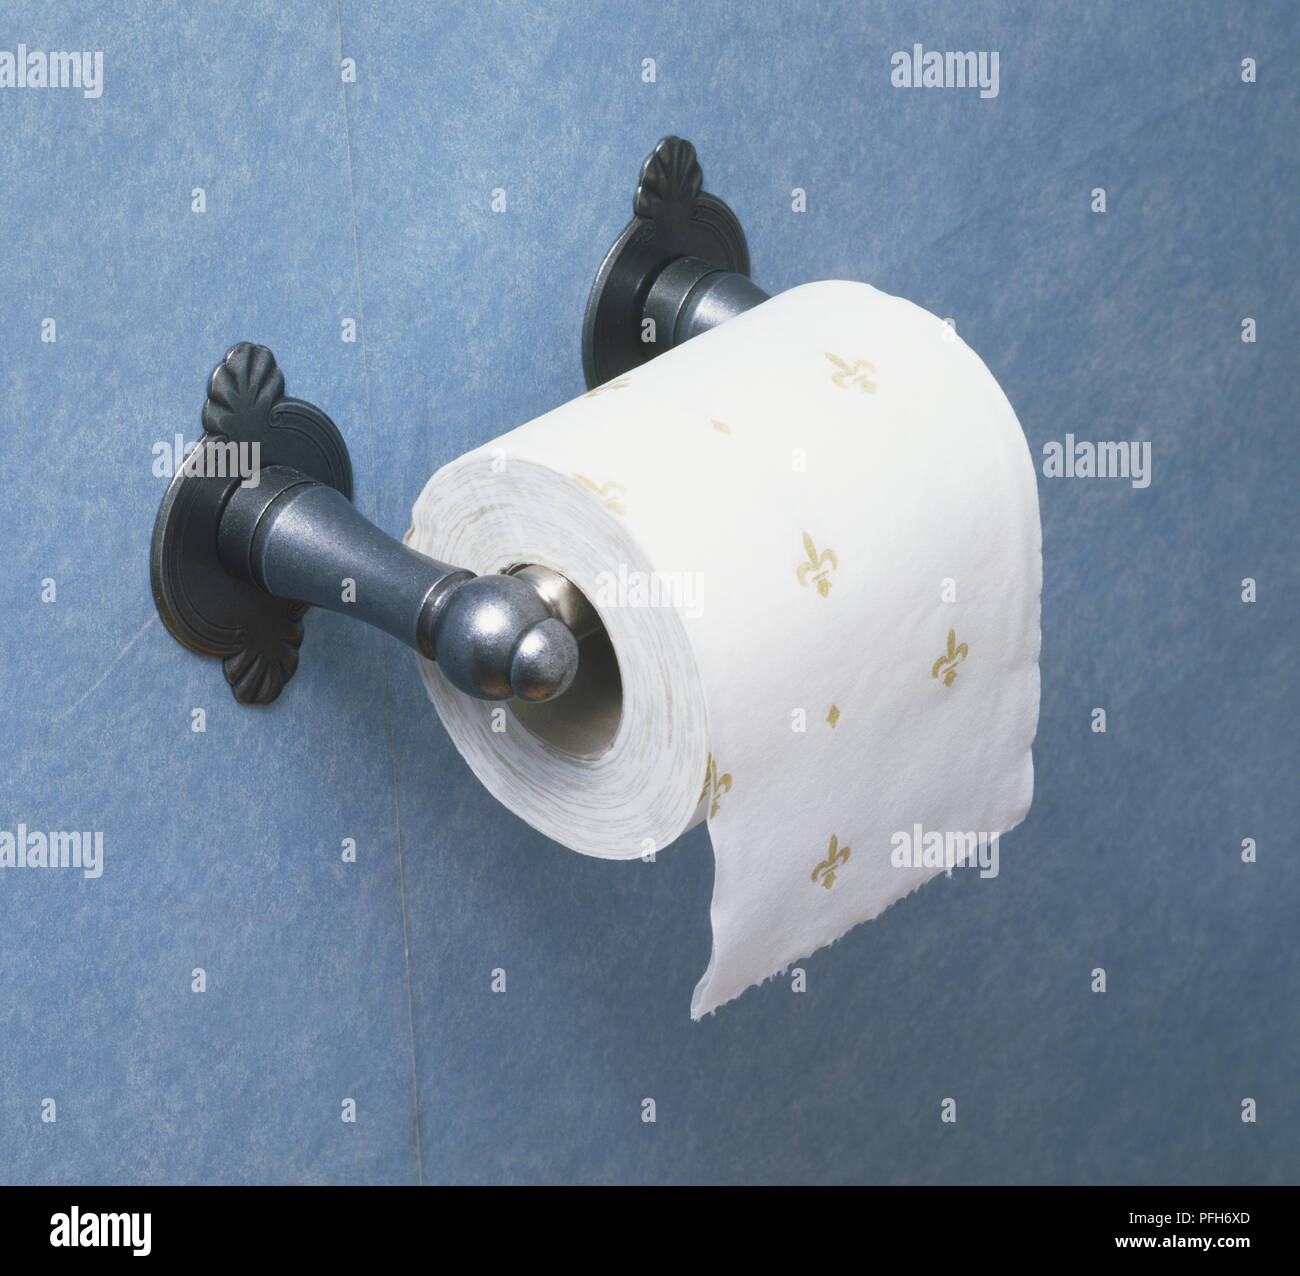 Roll of toilet paper showing fleur de lis pattern and ornate metal holder Stock Photo